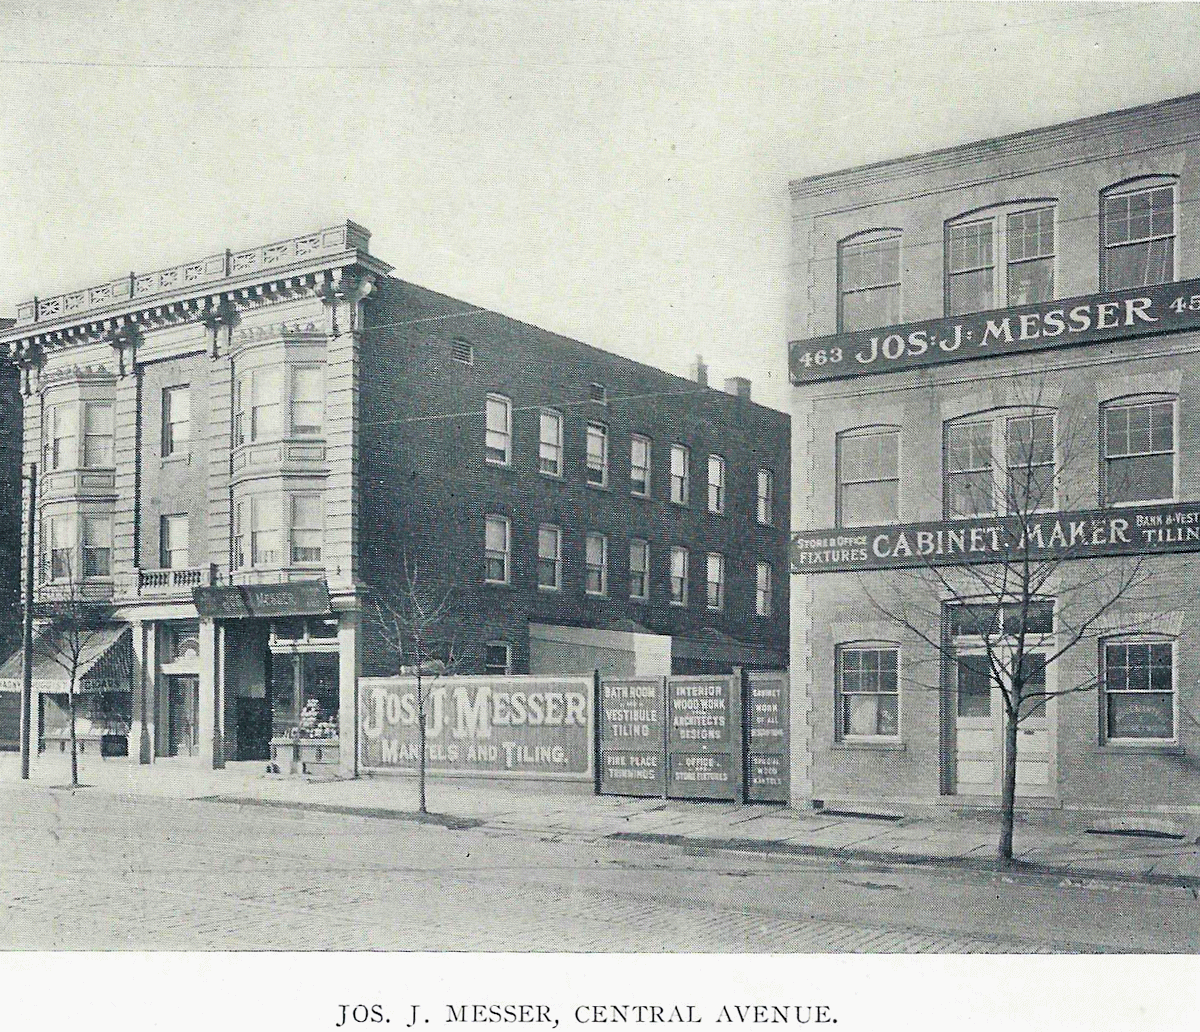 457 Central Avenue
Jos. J. Messer Cabinet Maker
From "Newark - The City of Industry" Published 1912
